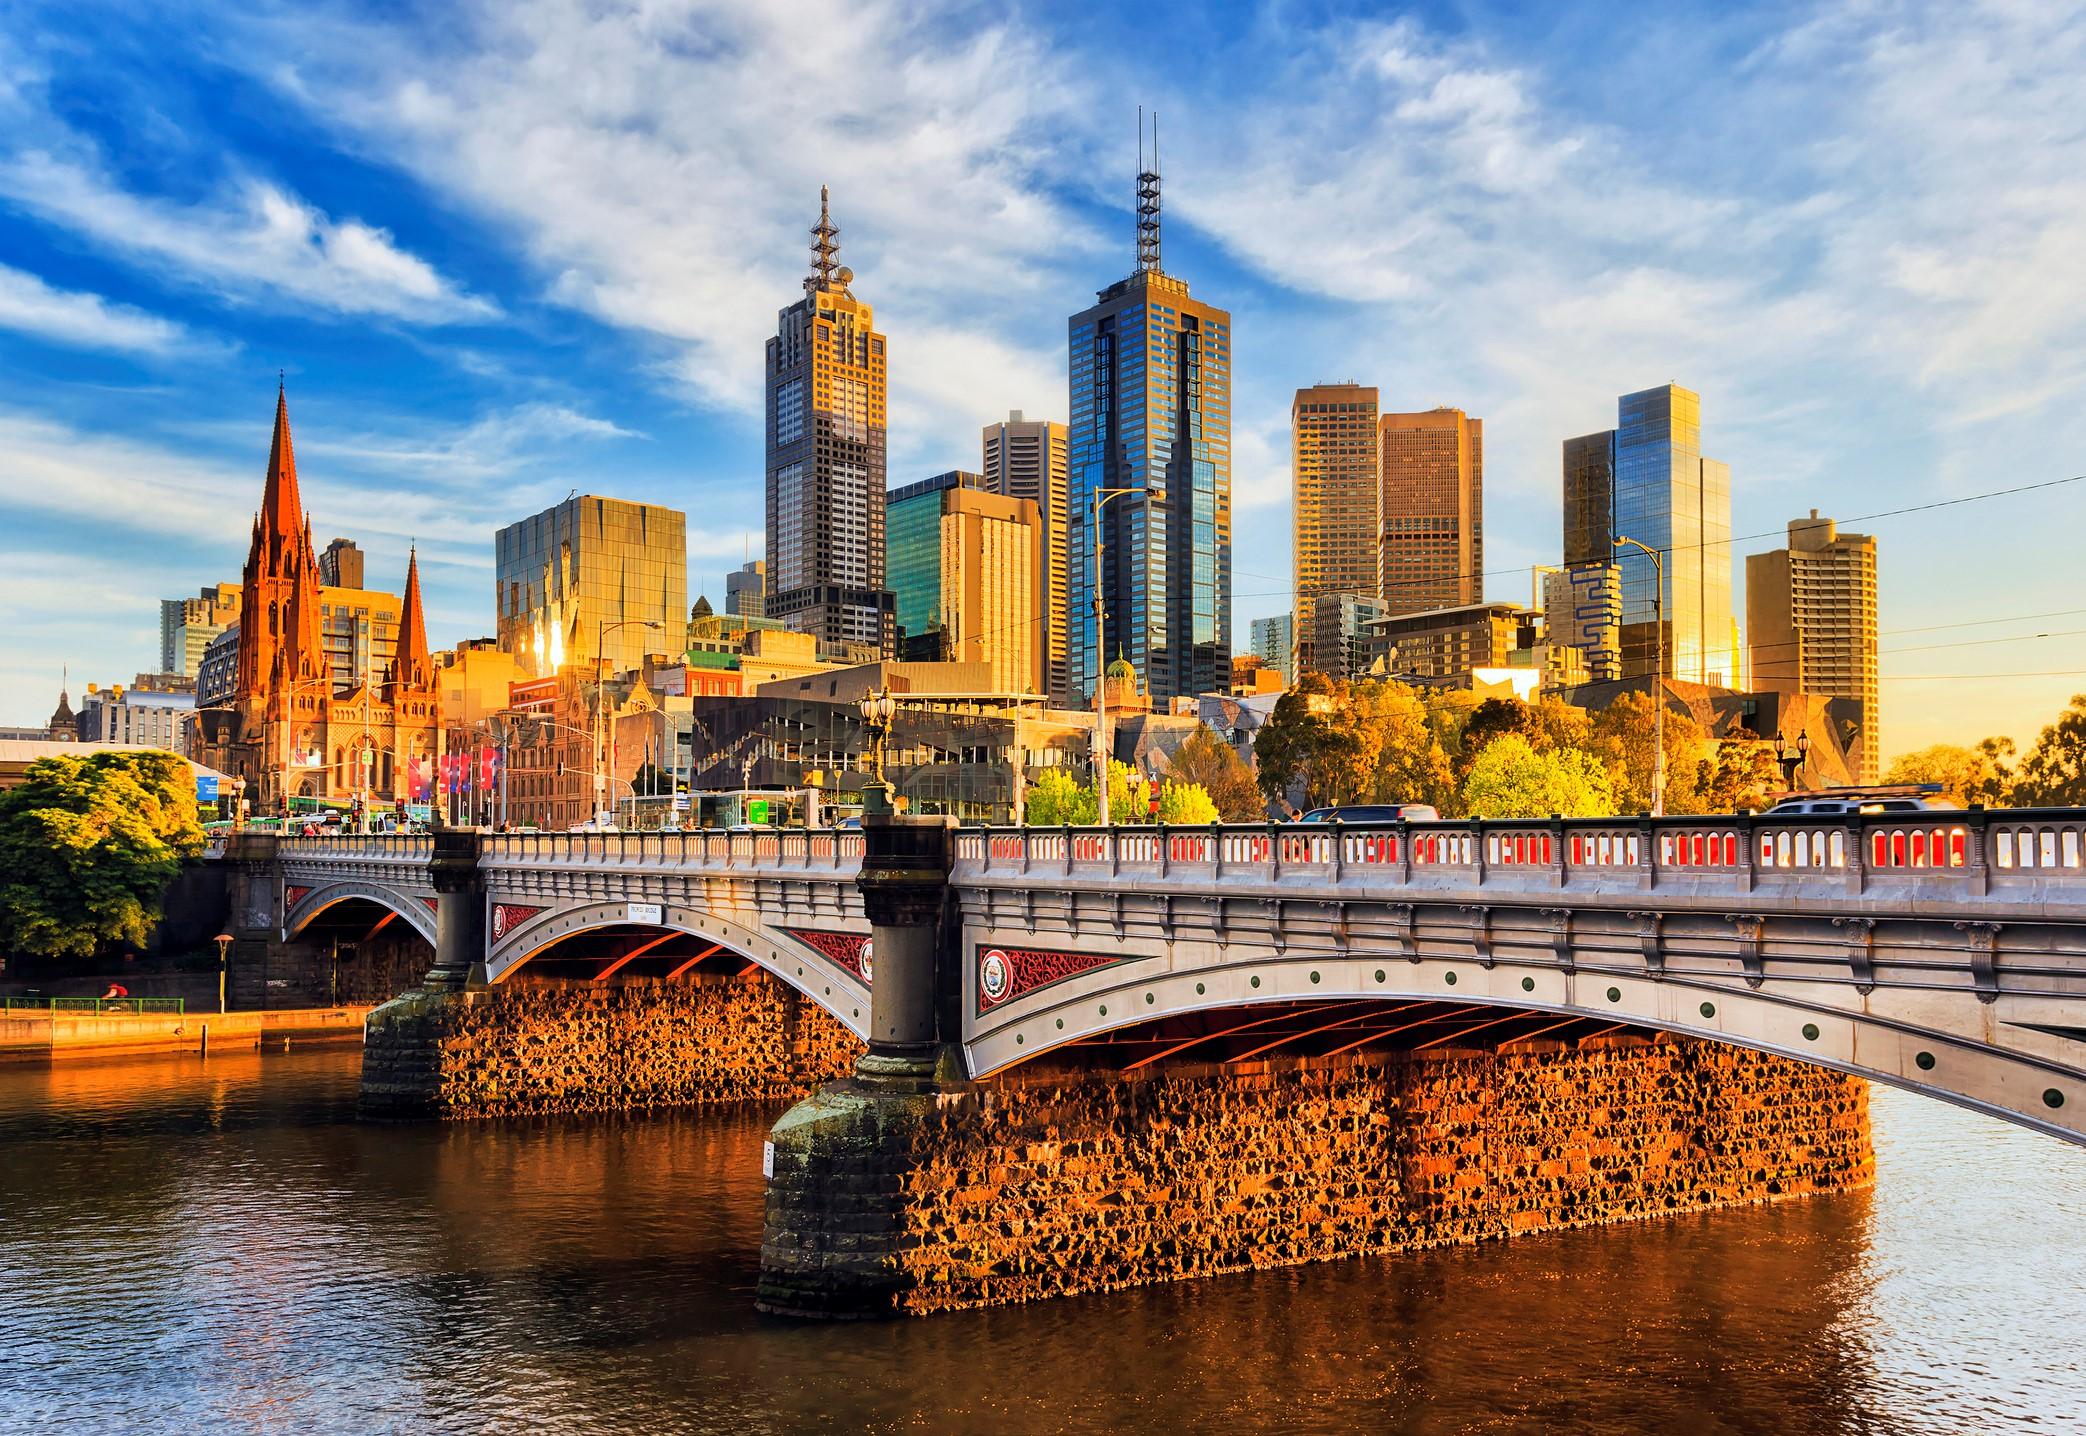 Melbourne is ranked in third place